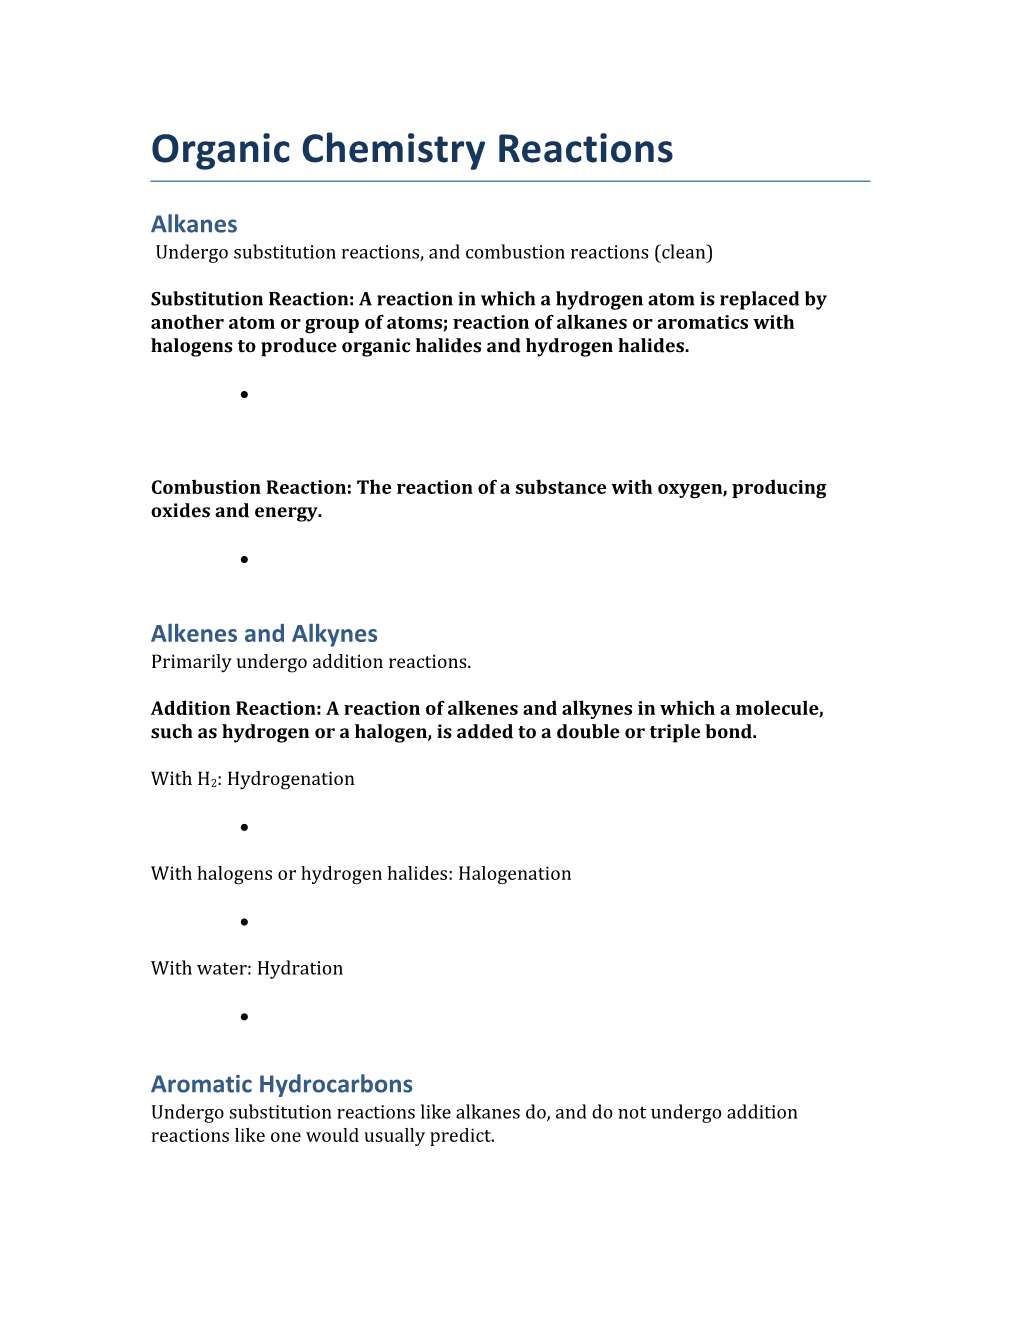 Undergo Substitution Reactions, and Combustion Reactions (Clean)